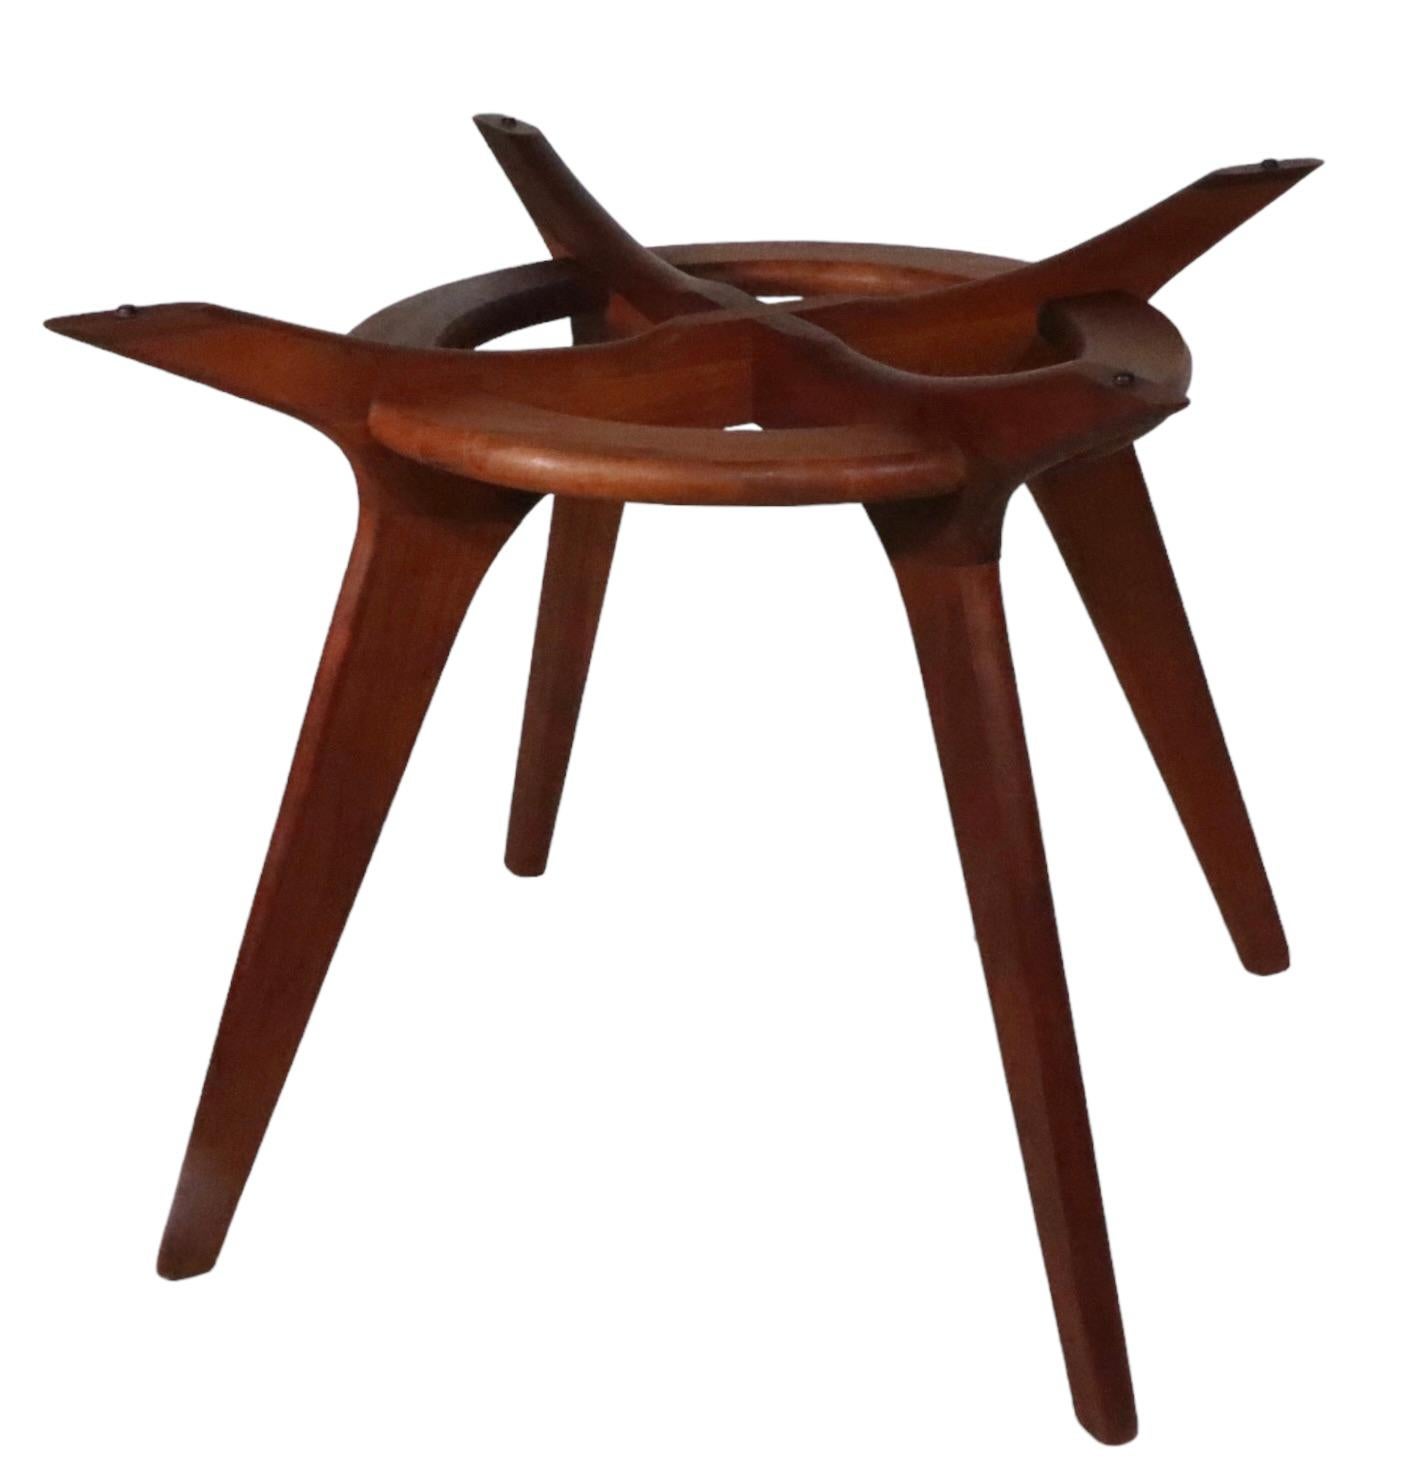 Iconic Mid Century design, compass dining table designed by Adrian Pearsall, for Craft Associates, circa 1960's. The table features an architectural and sculptural wood base, which supports the original round  thick glass top. This example is in